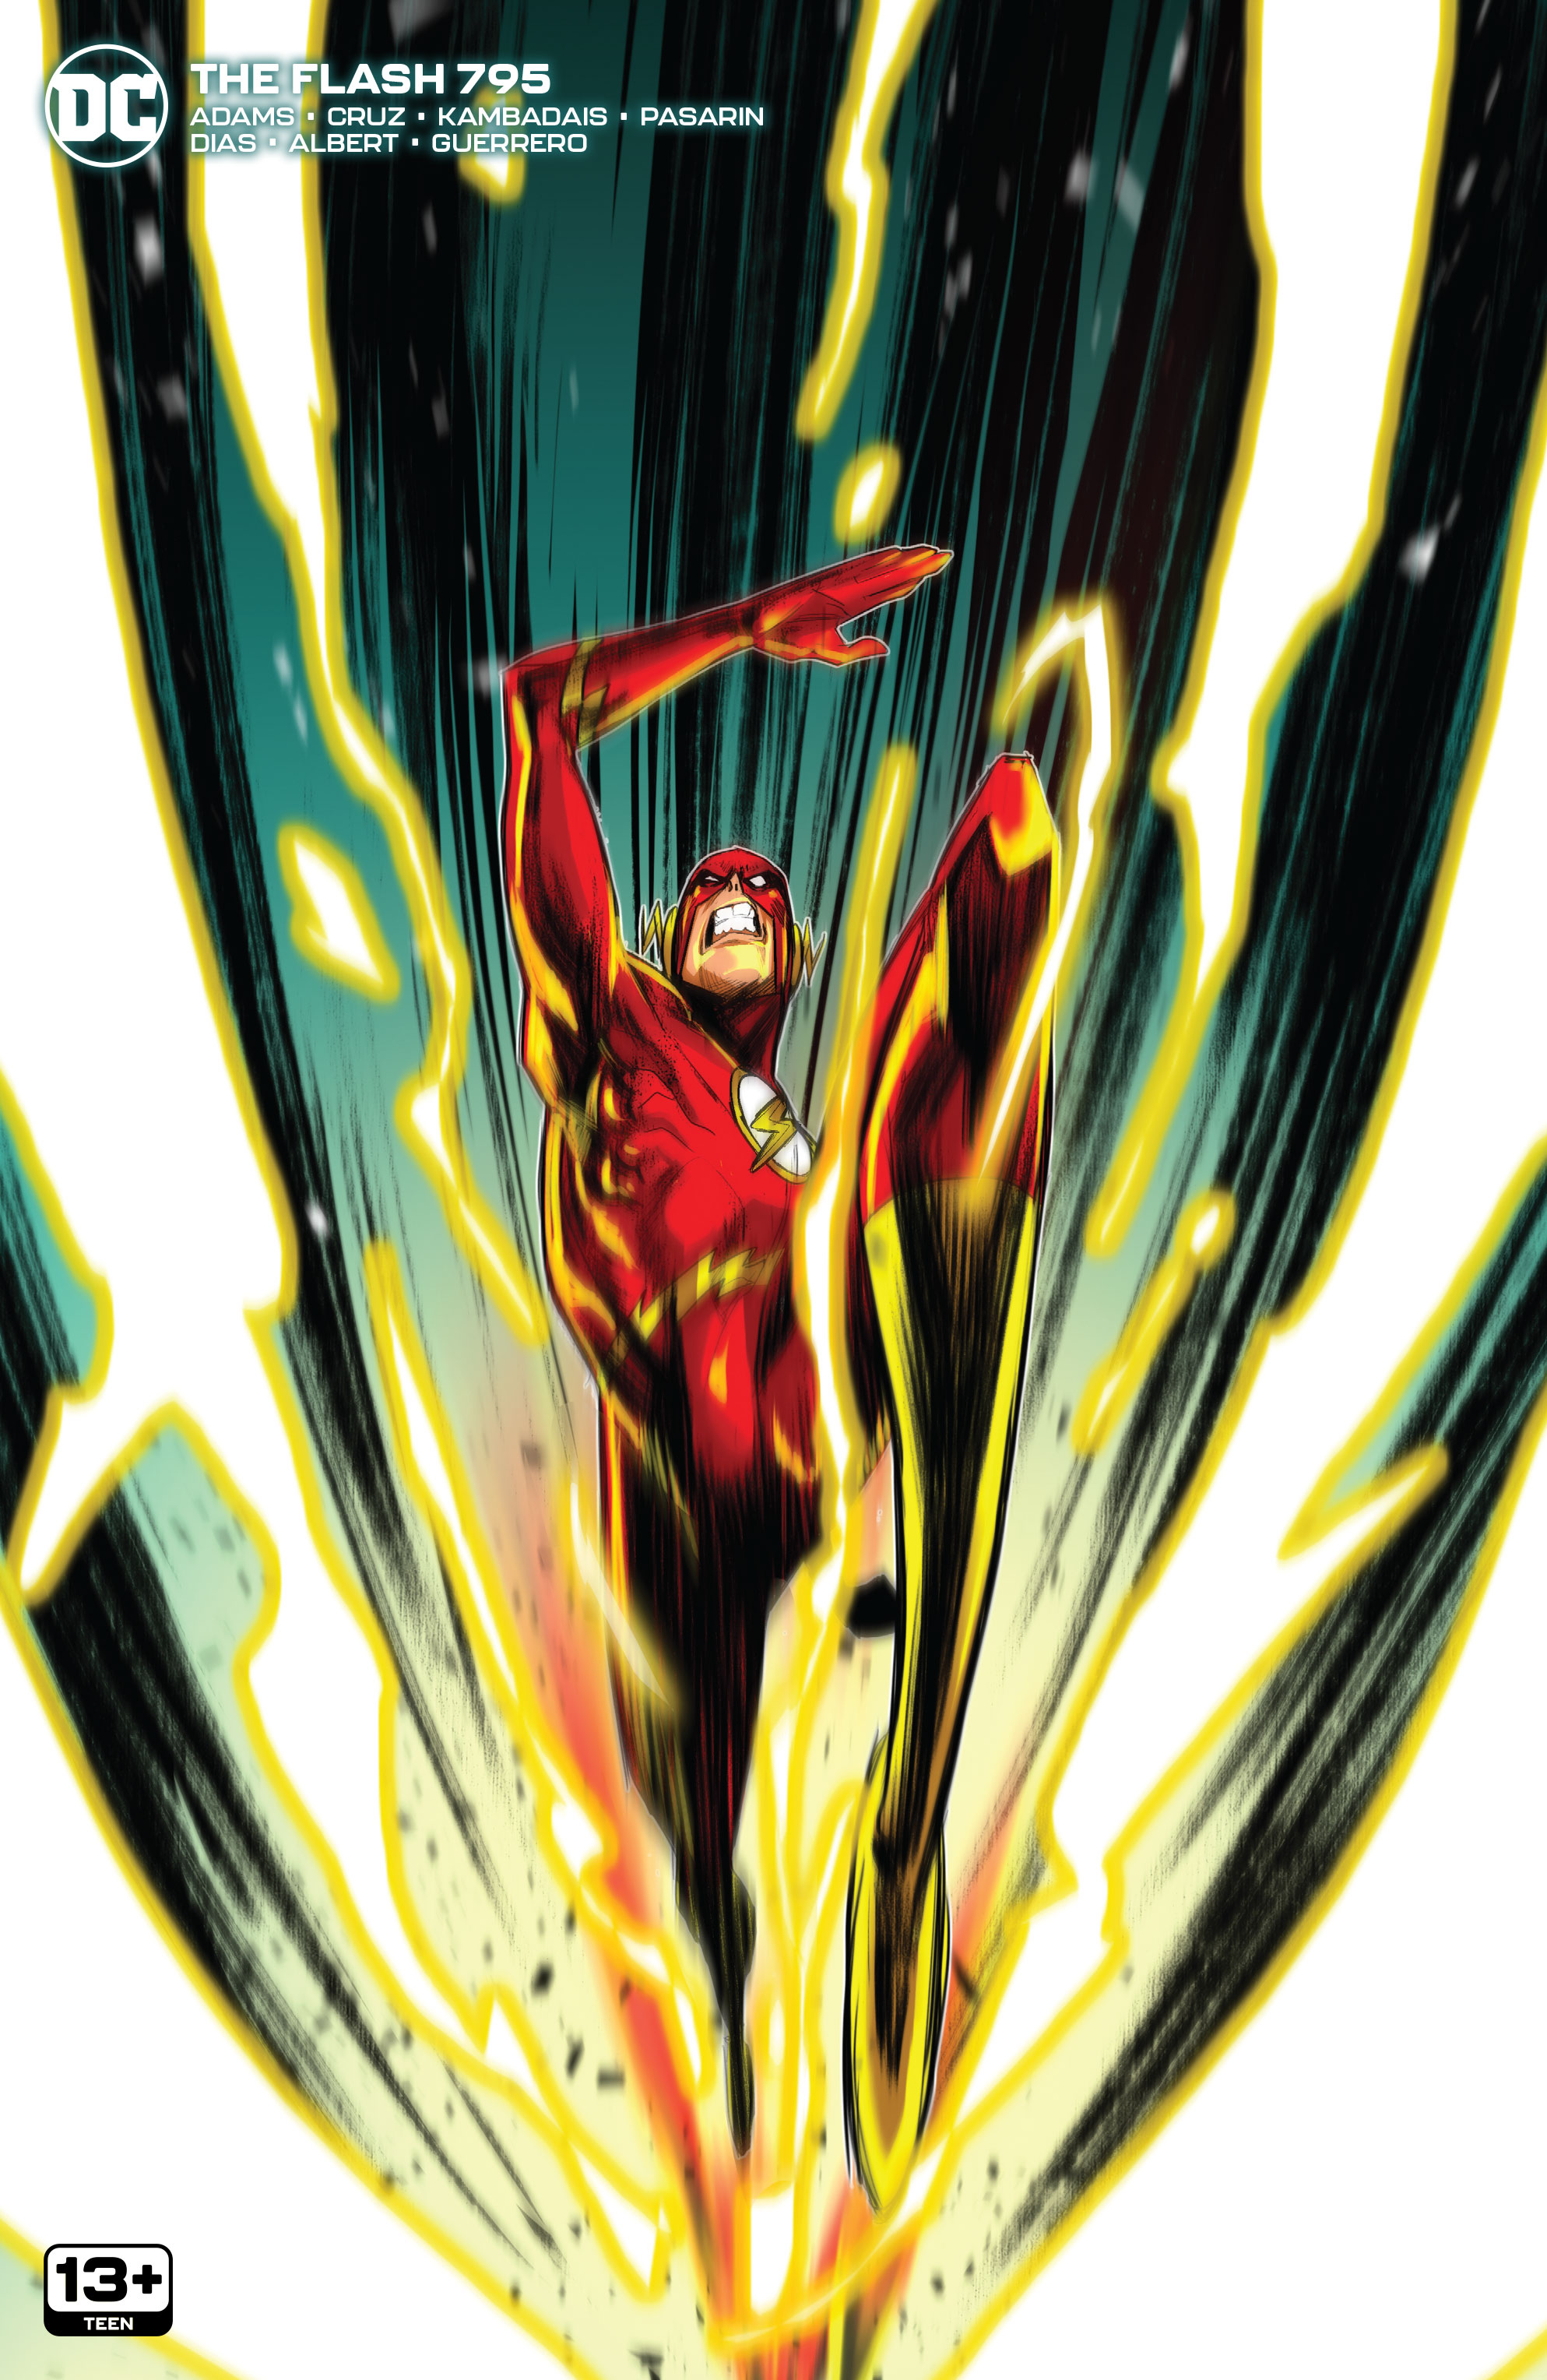 The Flash Vol 1 795, DC Database